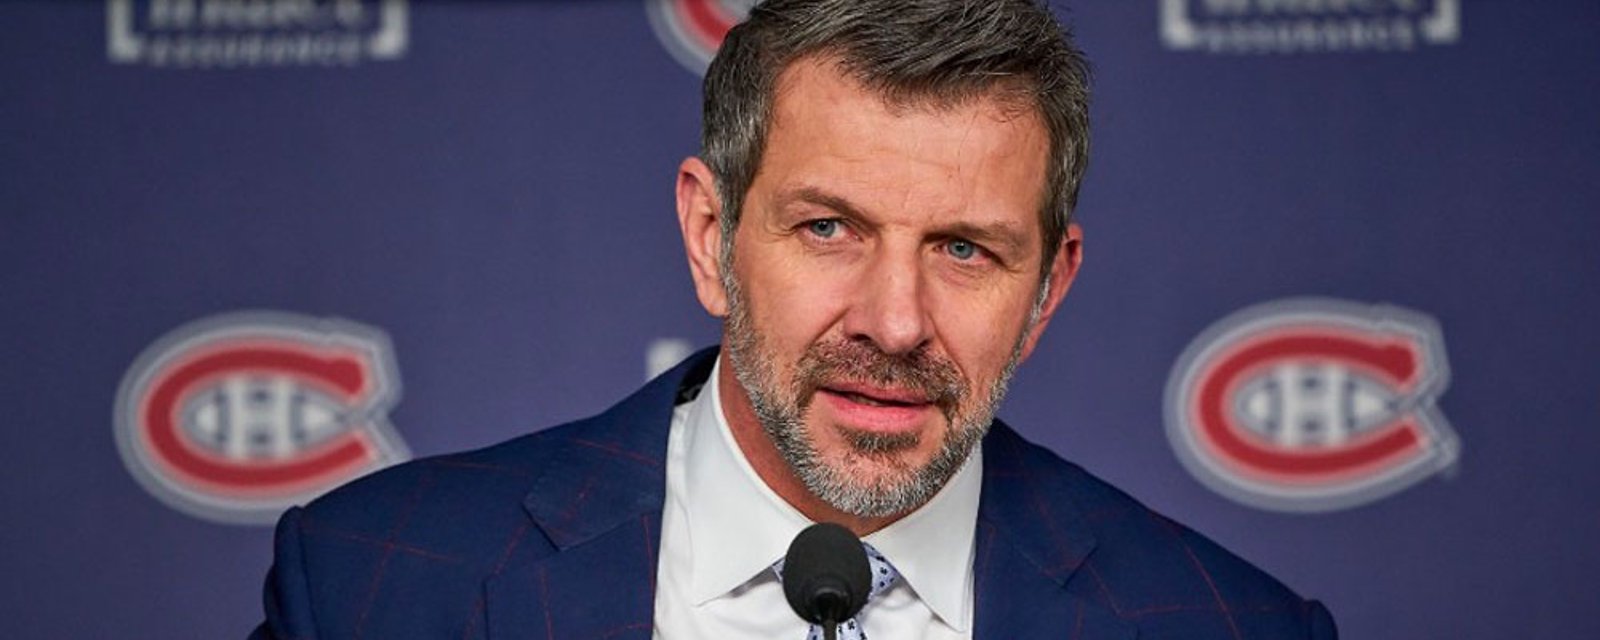 Confirmed: Habs GM Bergevin negotiating with former NHL head coach to replace Julien